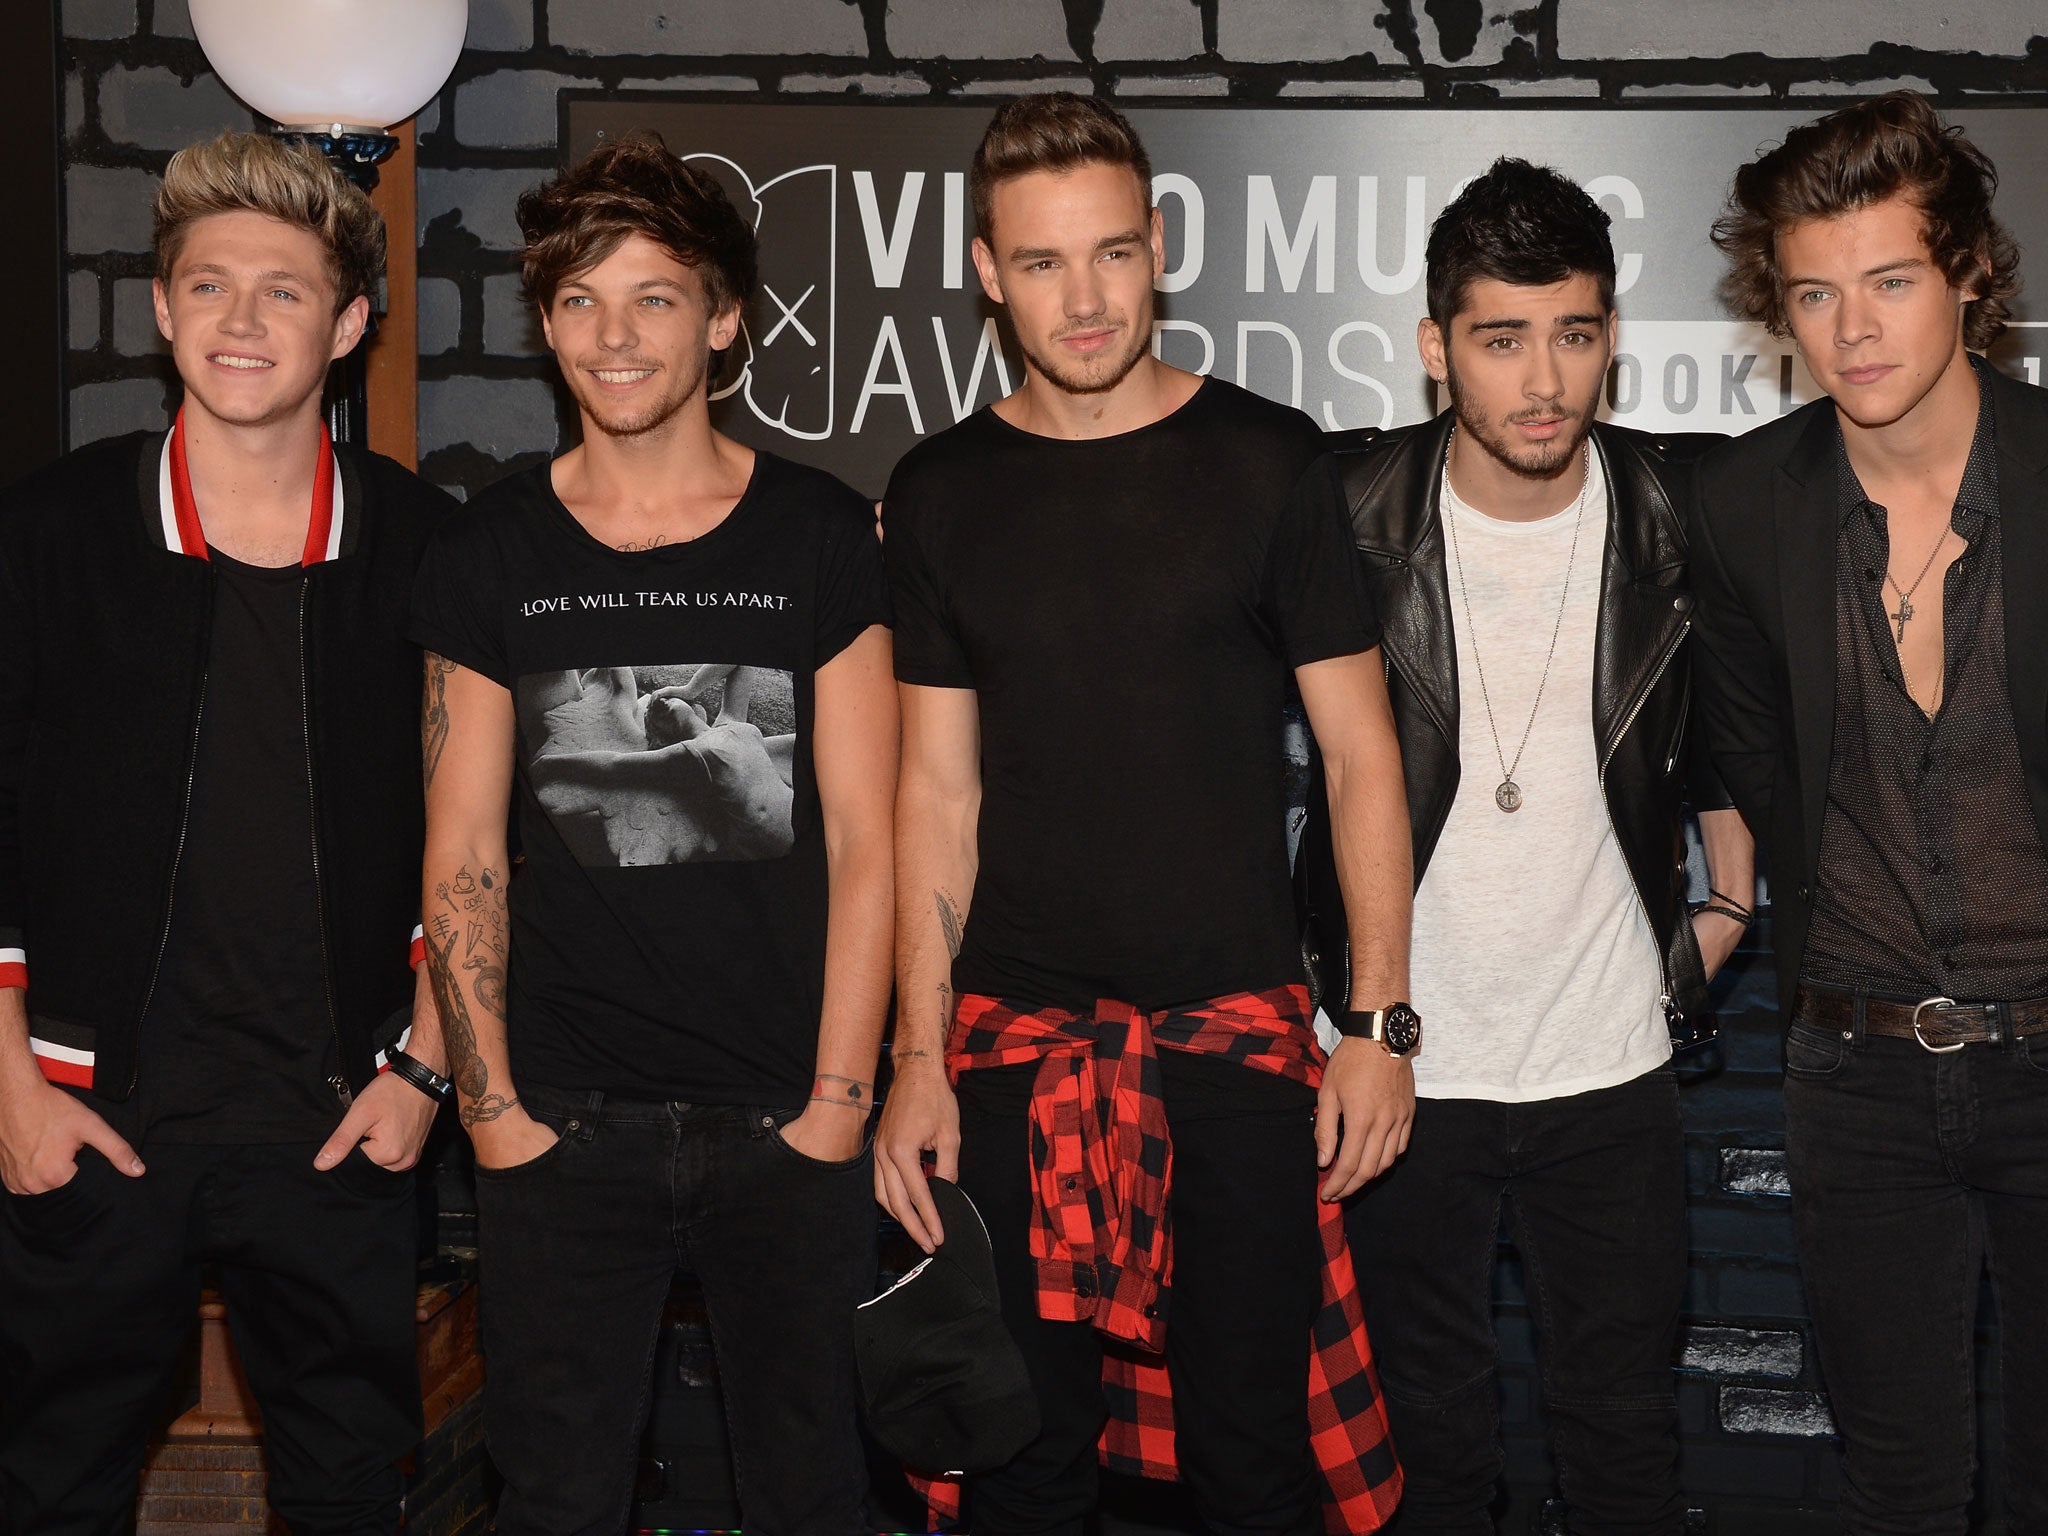 One Direction are heading for their second number one album with Midnight Memories